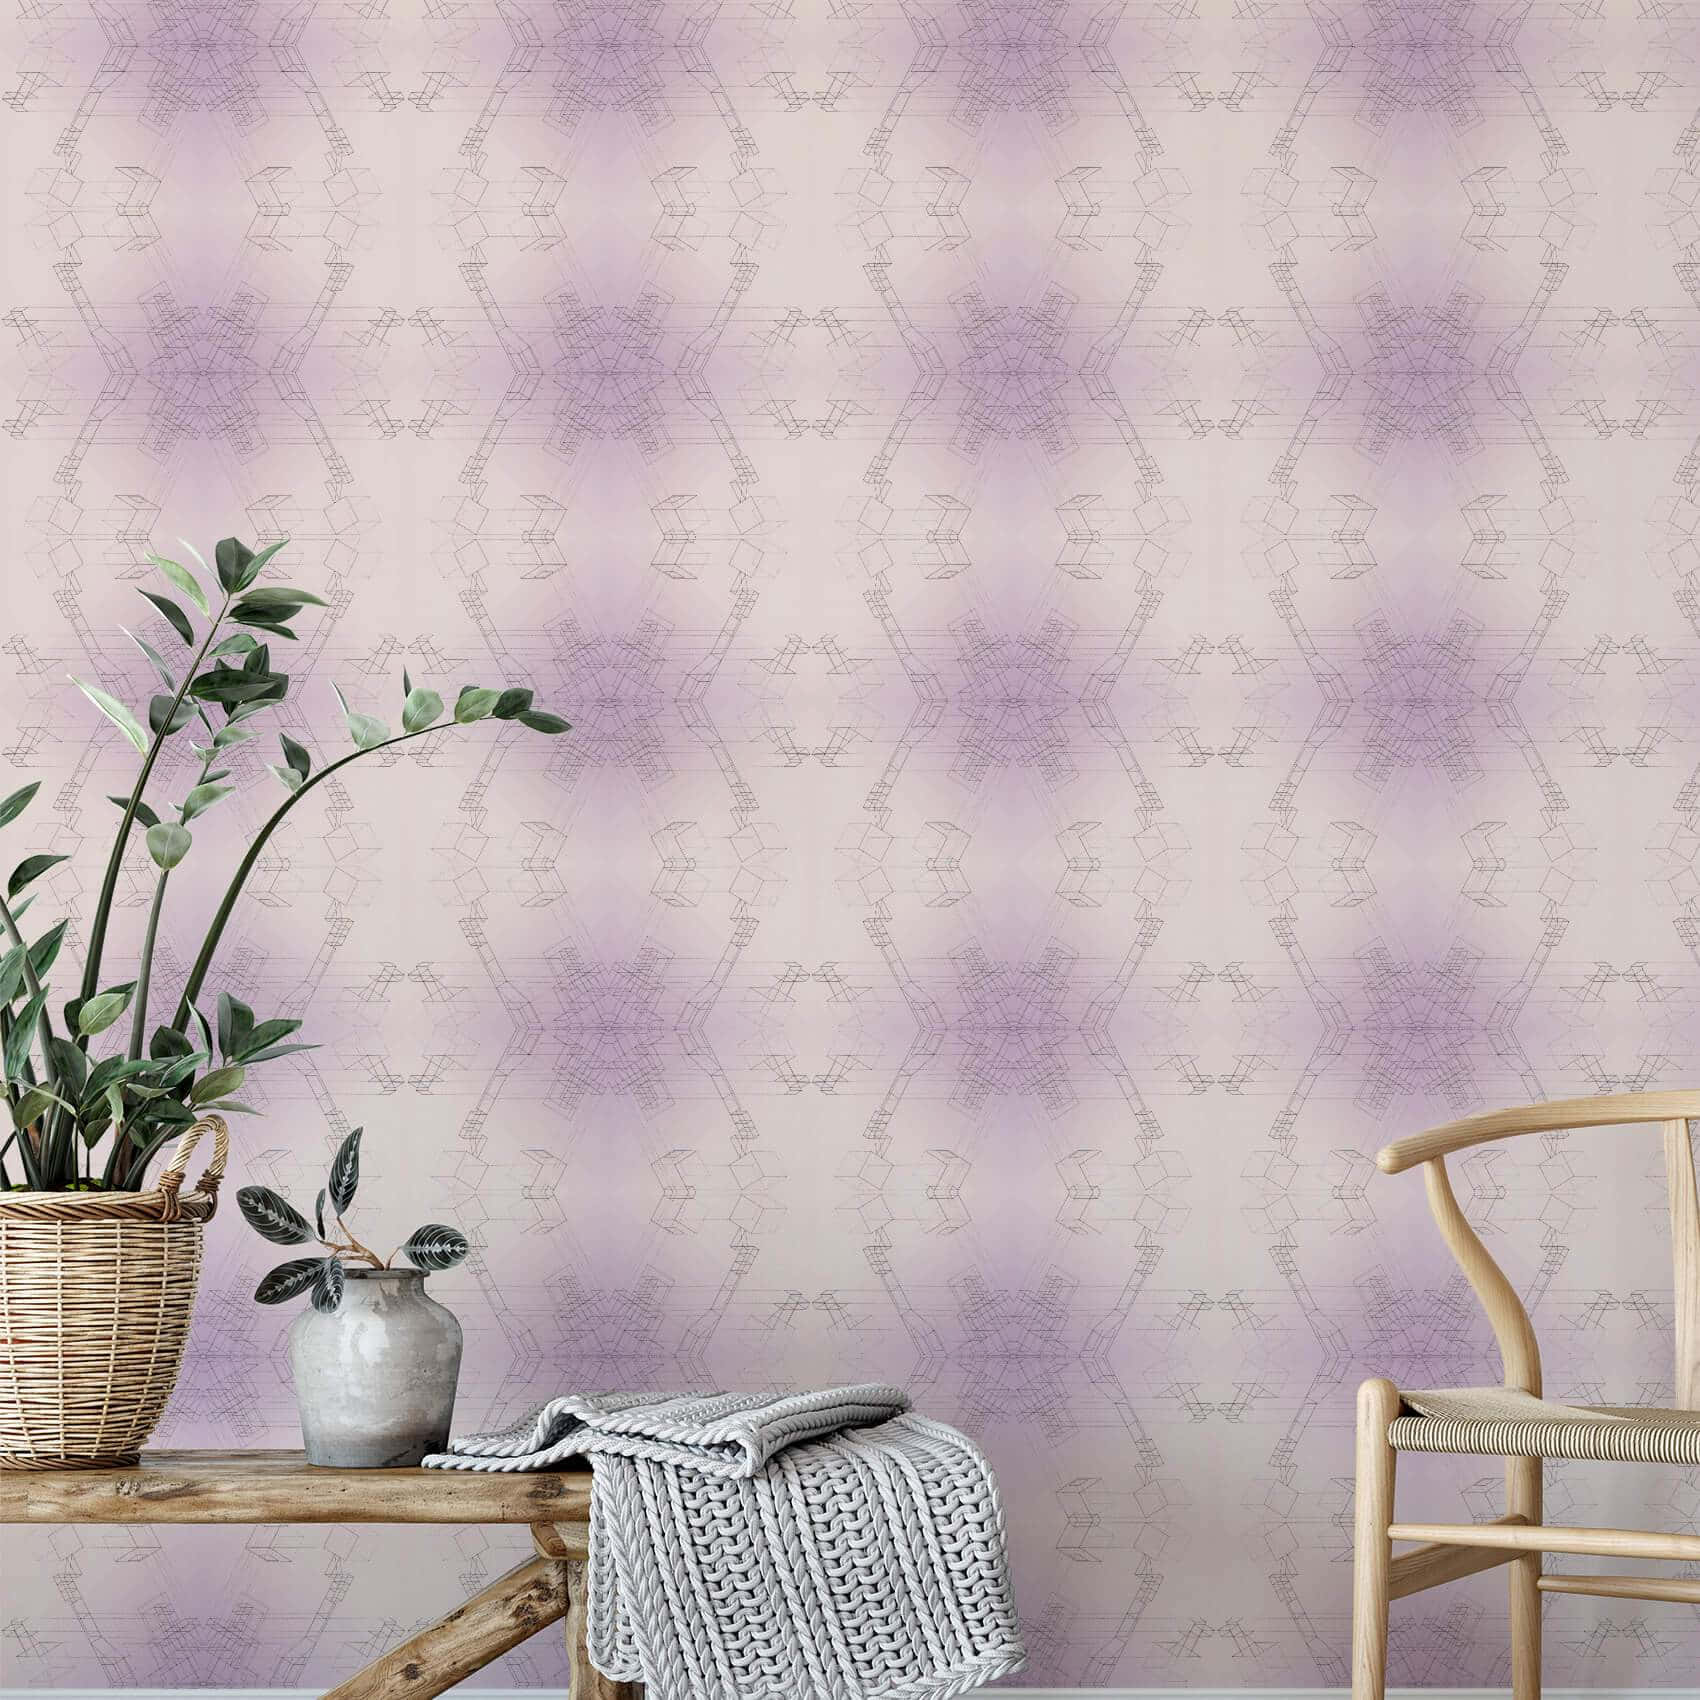 A Vibrant Lilac-colored Paper Texture Adding A Delicate Touch To Your Space. Wallpaper